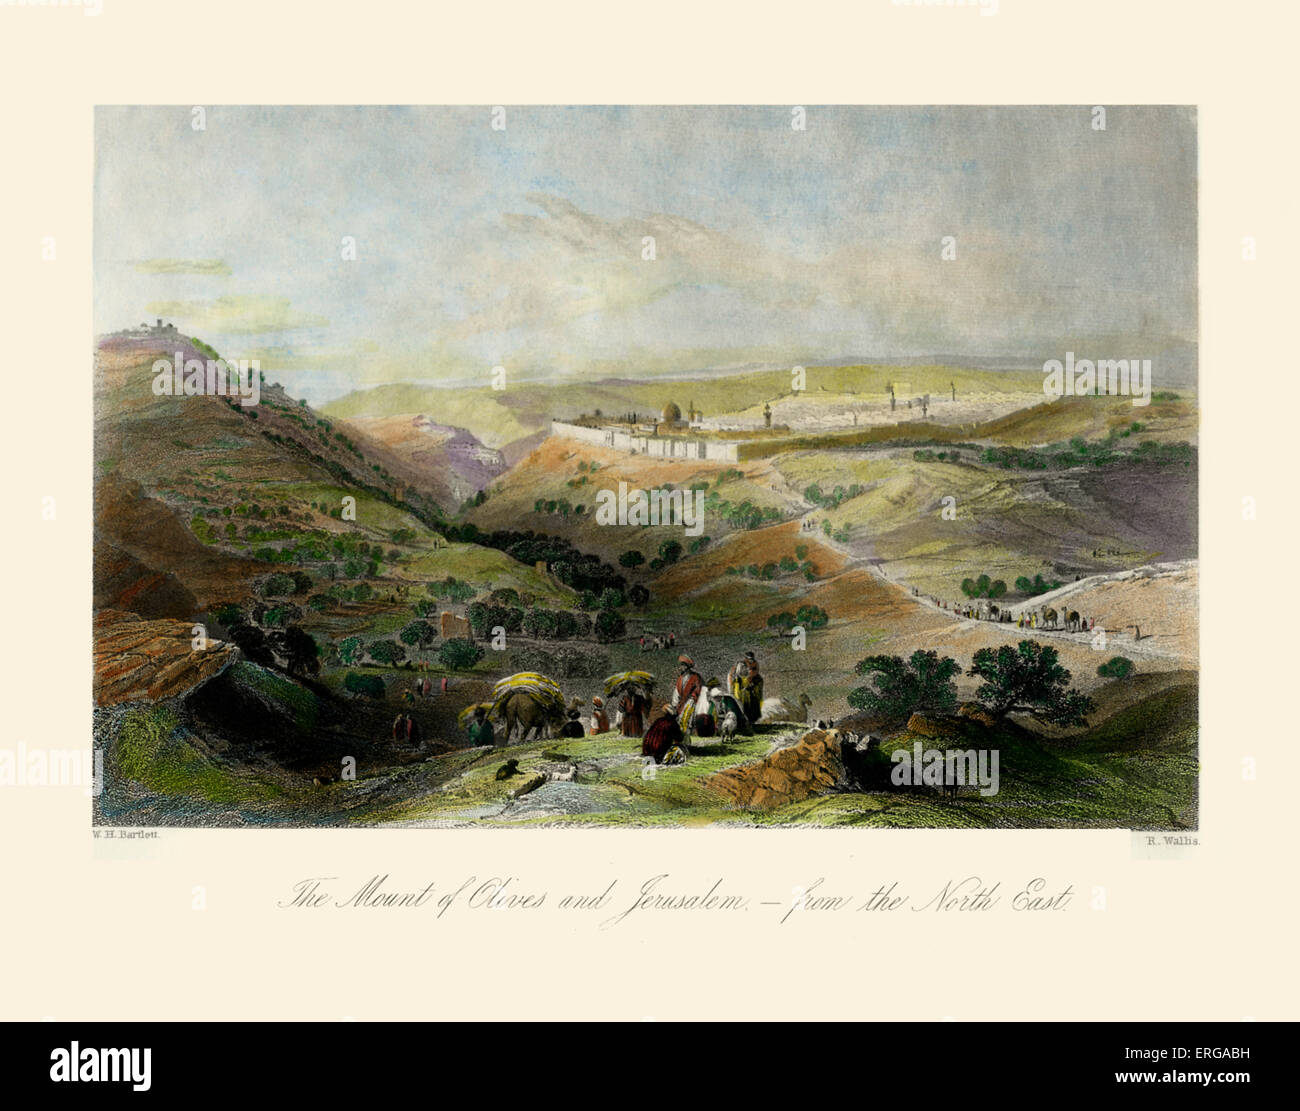 The Holy Land - The Mount of Olives and Jerusalem from the north east. 1840 hand coloured engraving. Drawn by William Henry Stock Photo